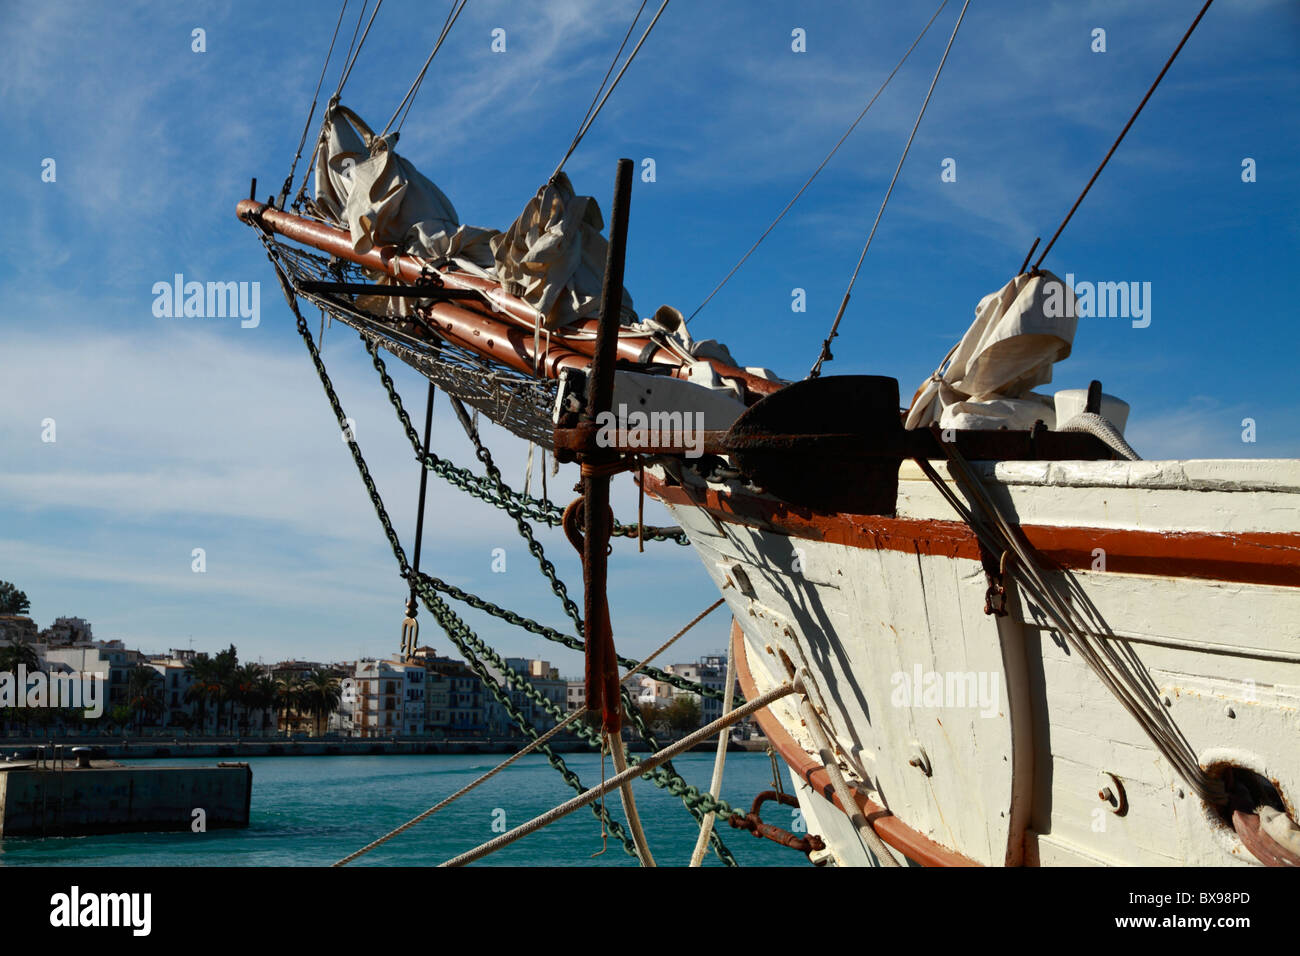 Detail view of bow and boom of a schooner (Tall ship) Stock Photo